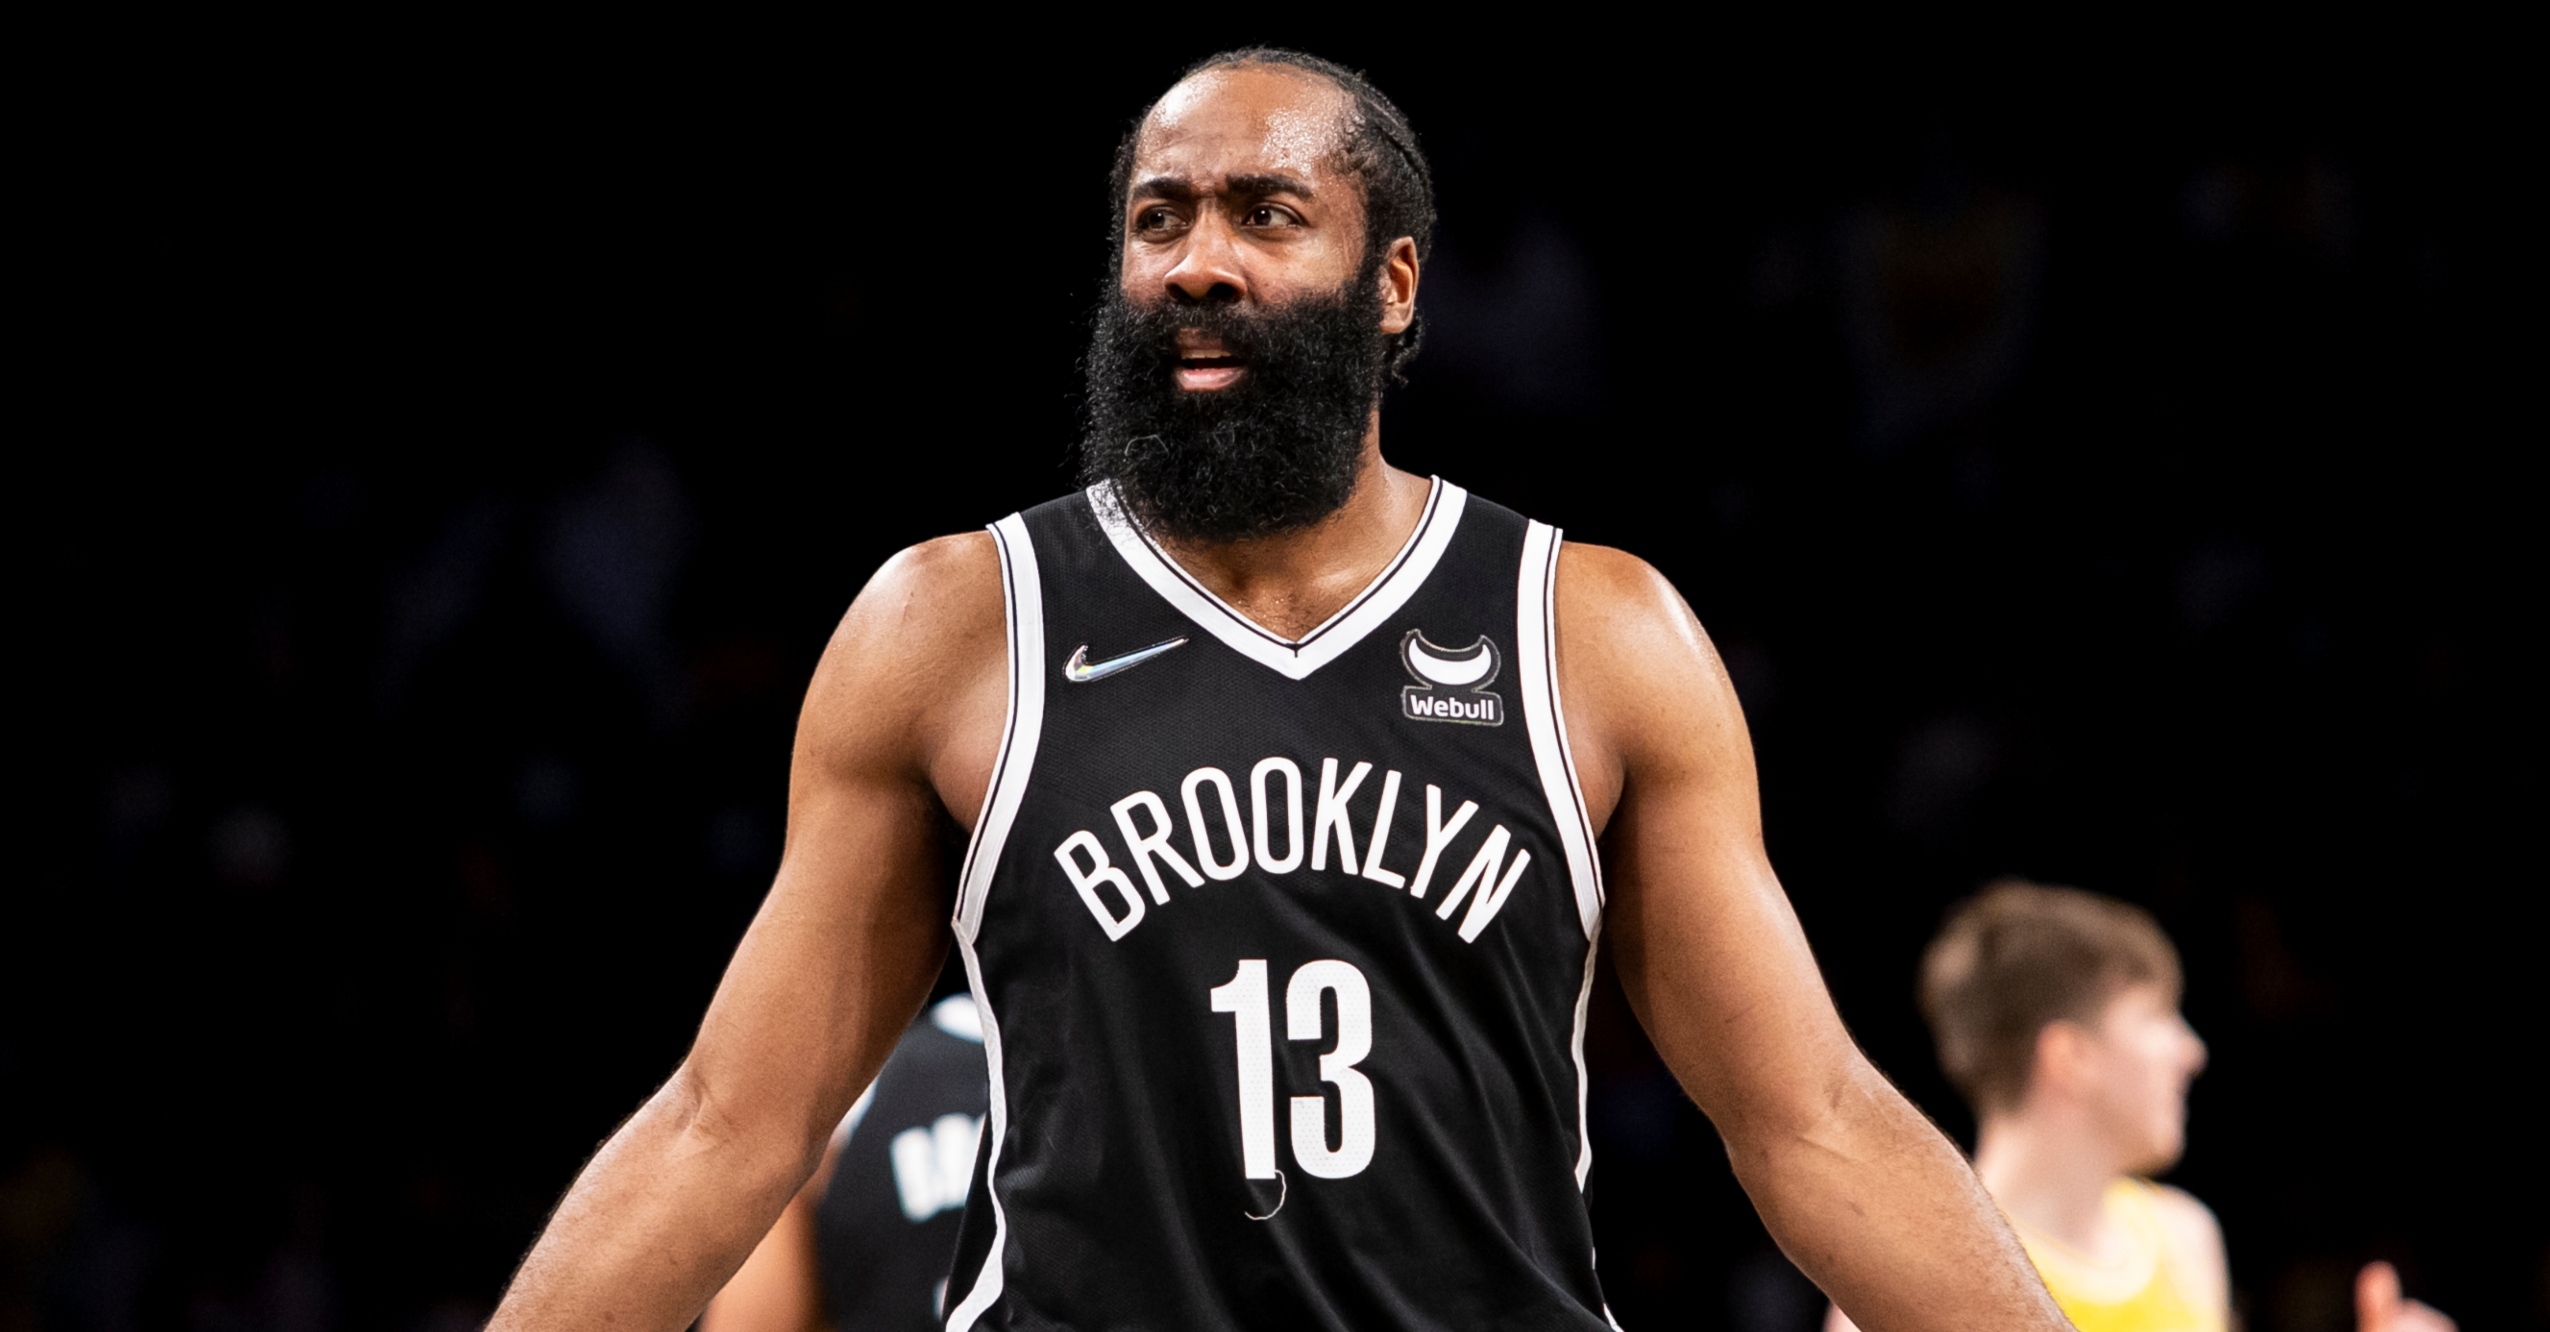 The James Harden Nets jersey drops, where to buy